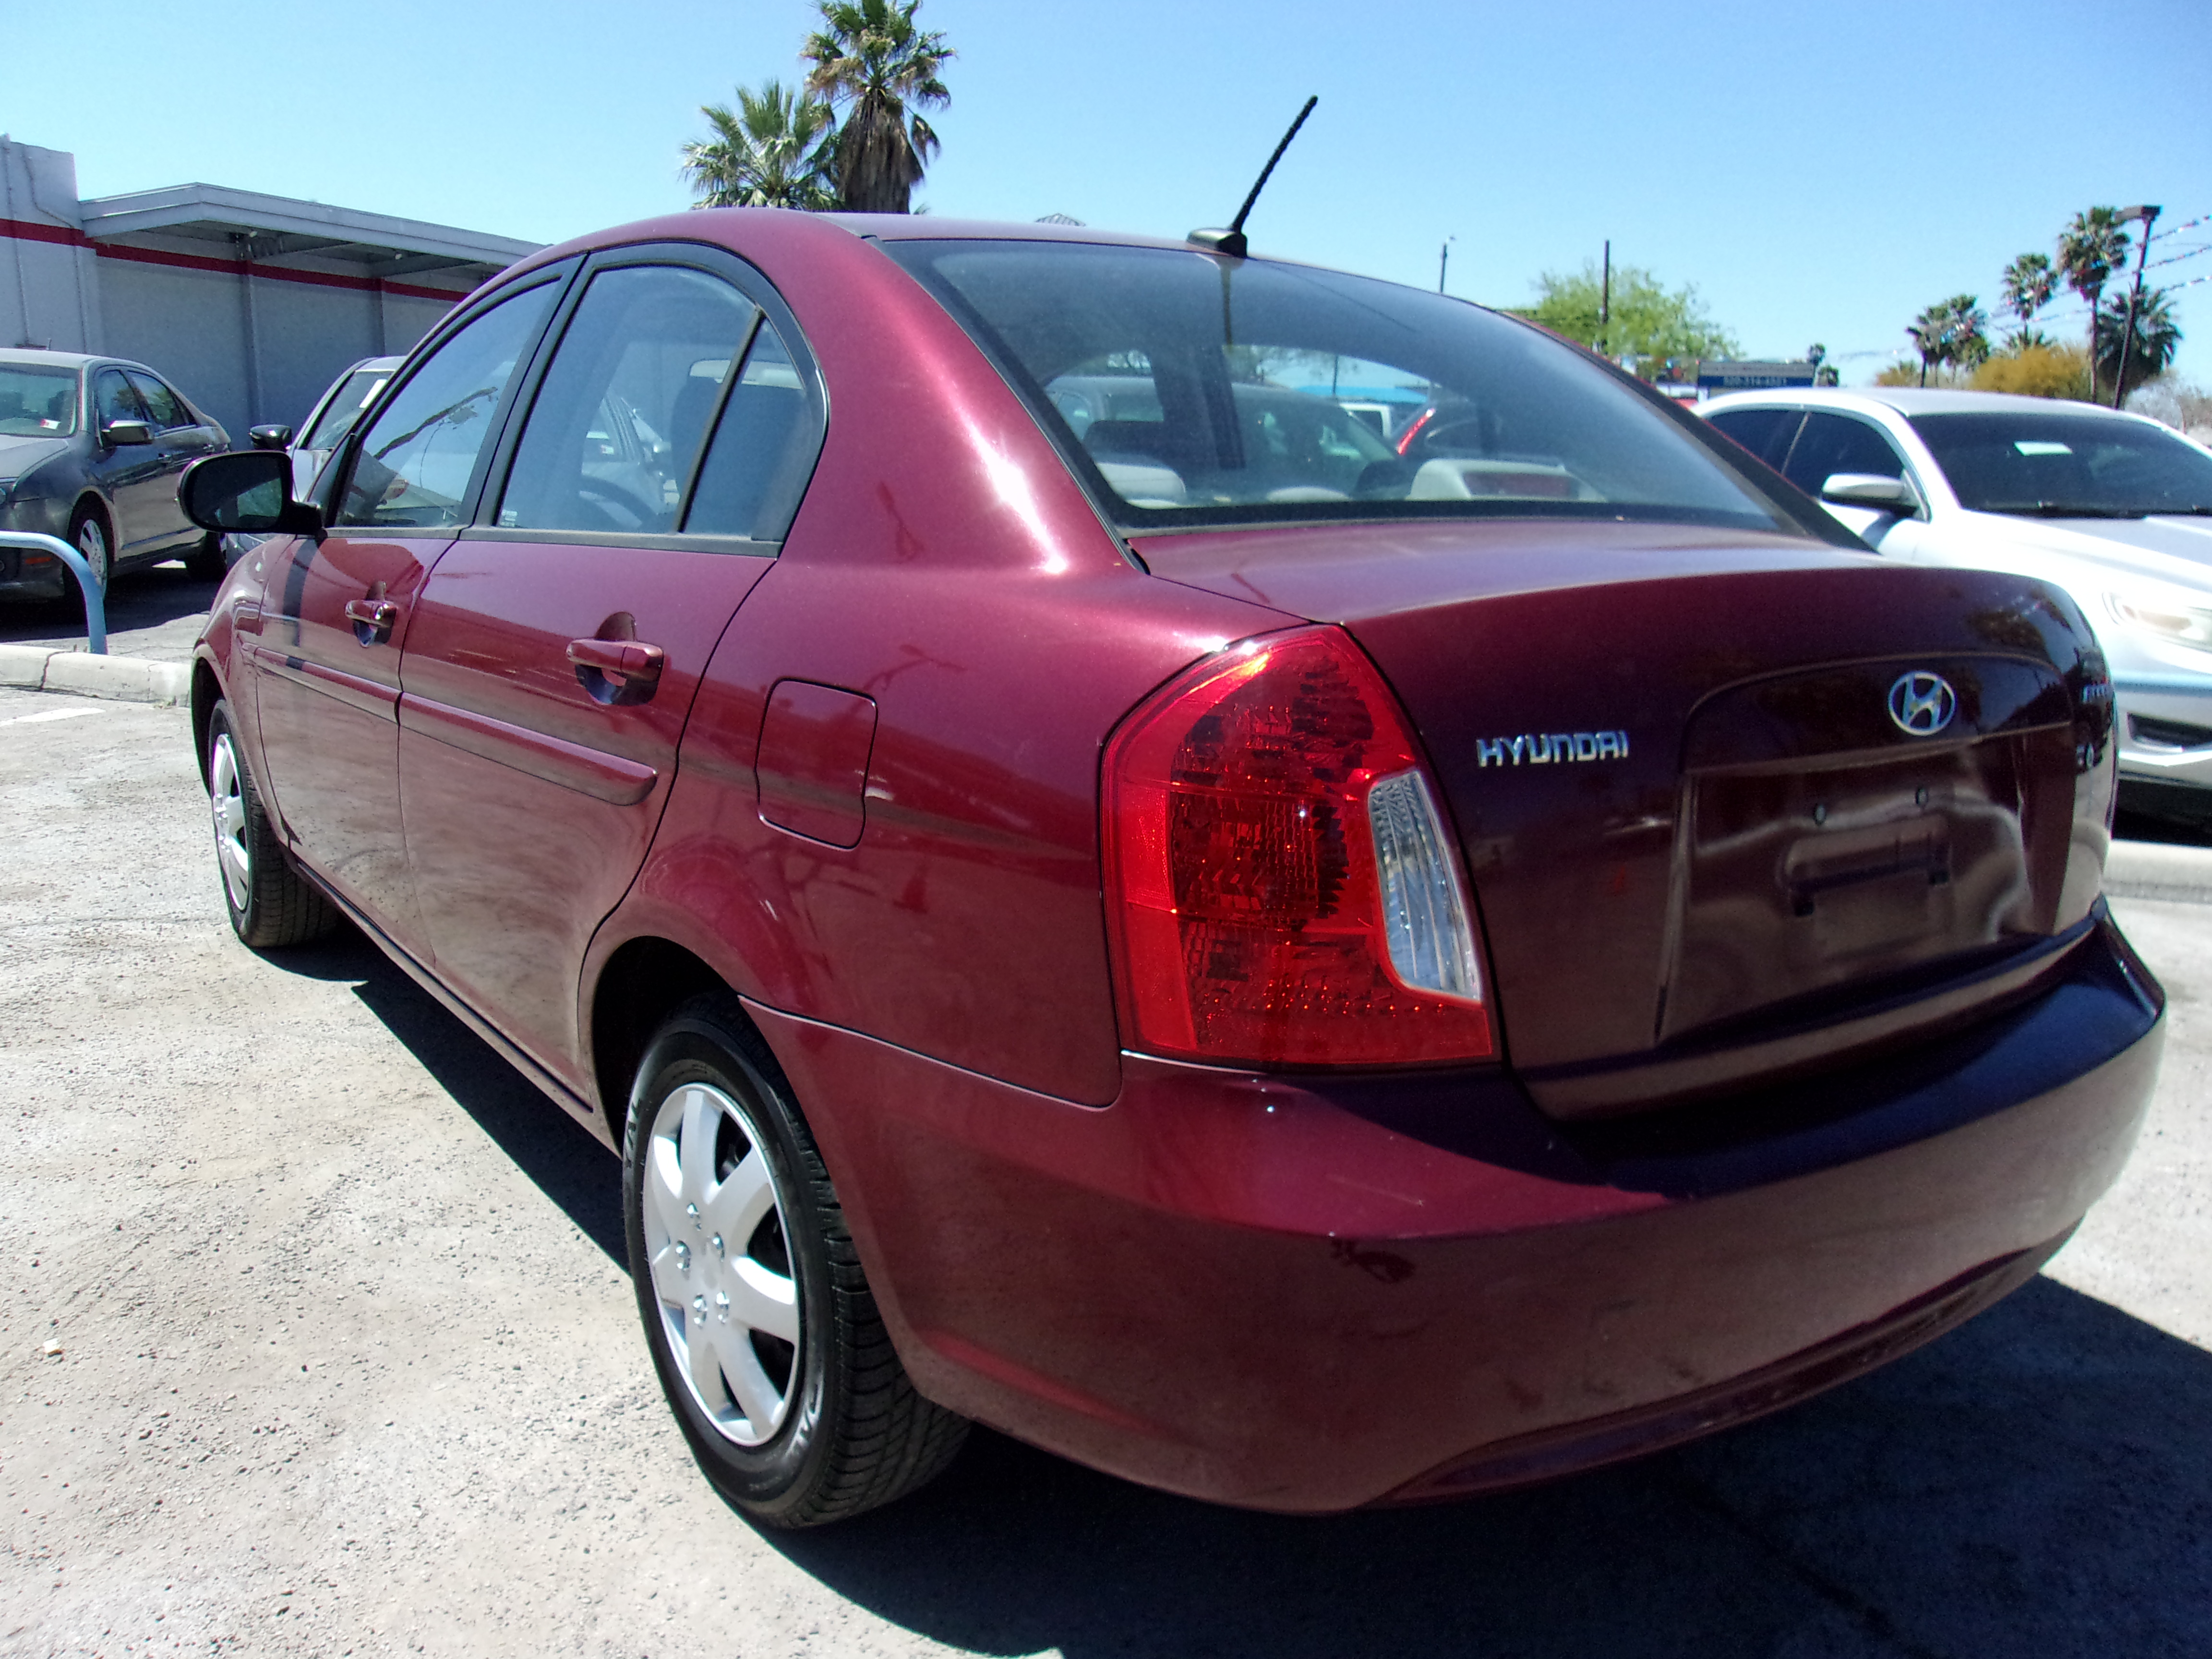 Pre-Owned 2010 HYUNDAI ACCENT 4dr Car in Tucson #S7466 | Tucson Used ...